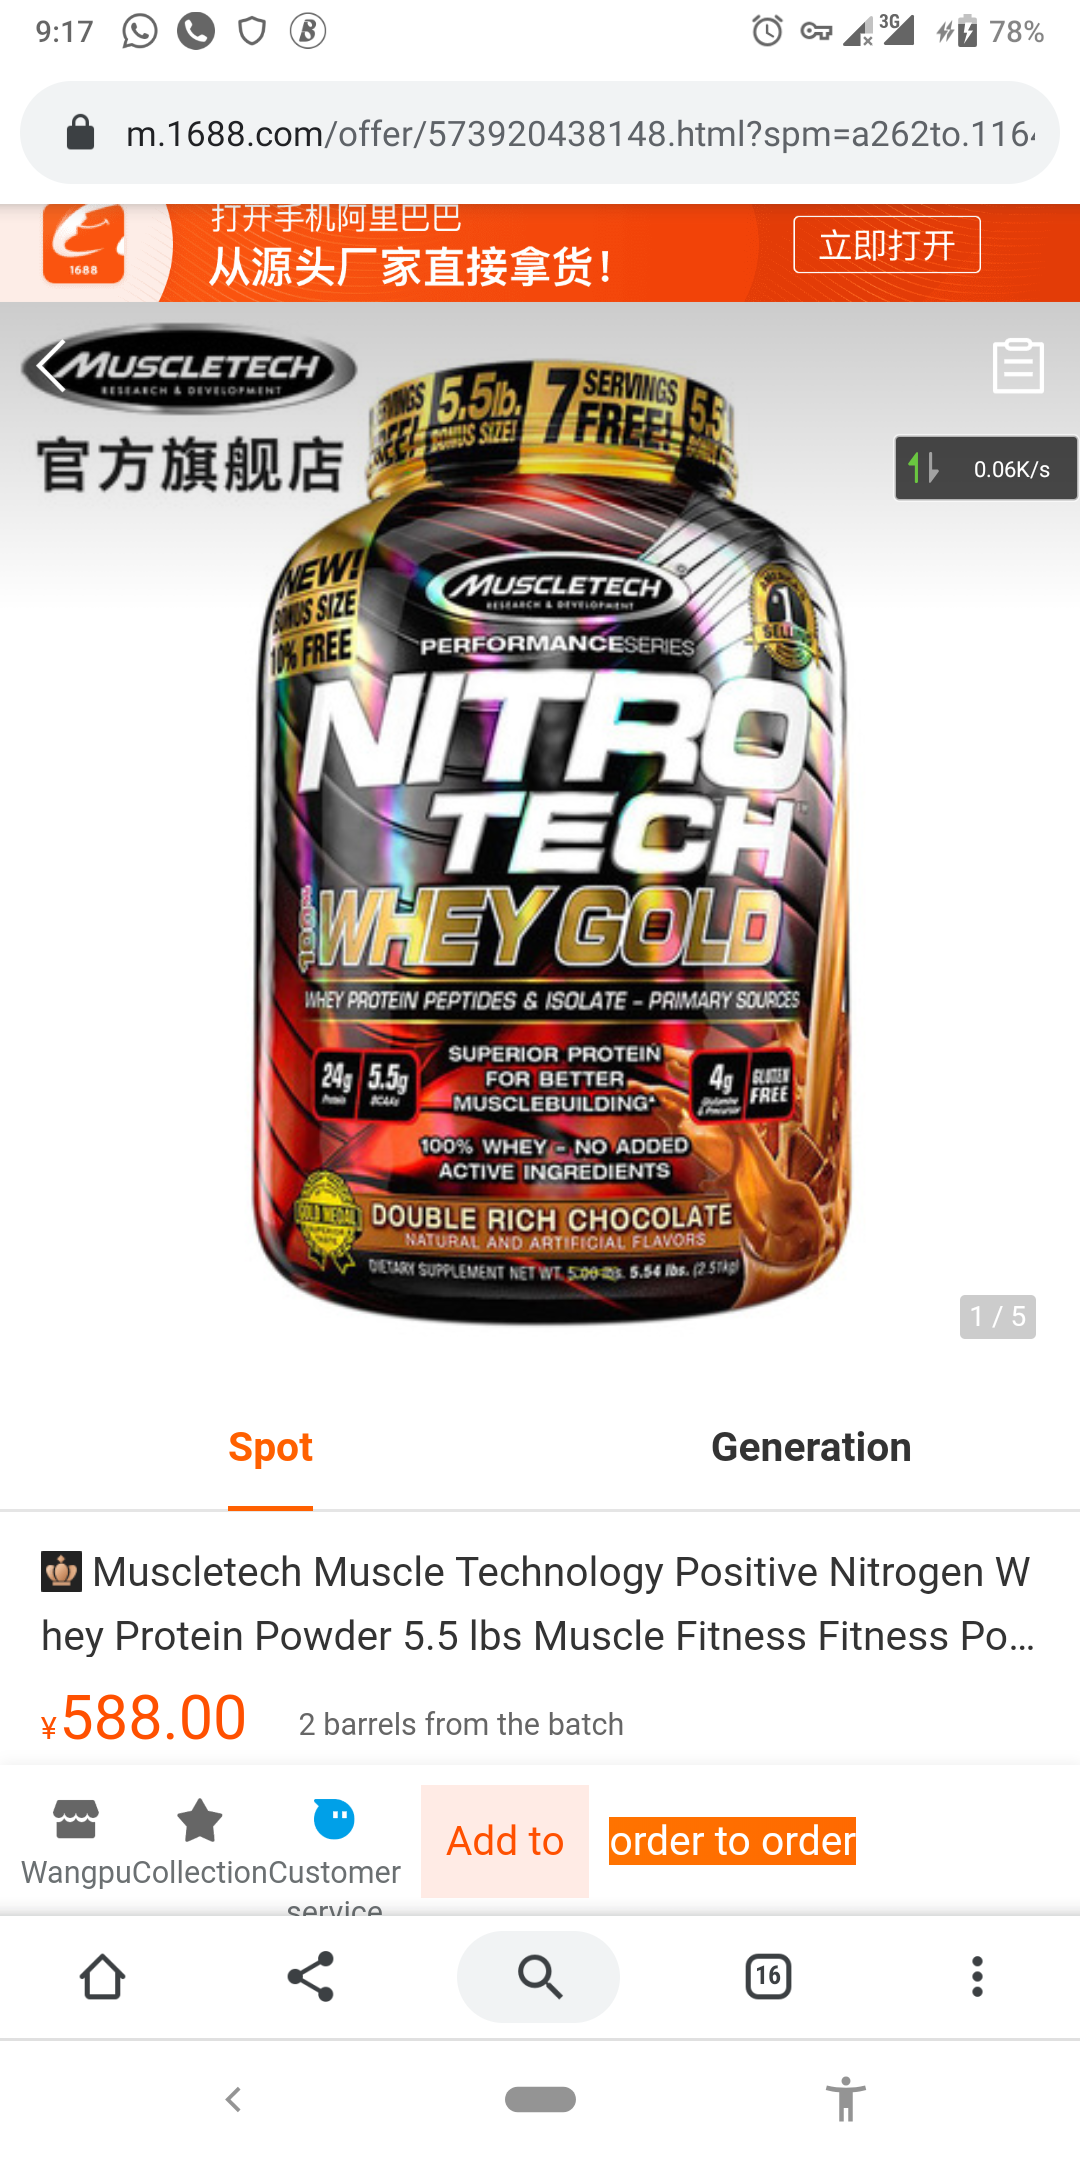 Product image - Muscle tech muscle building technology 5.5lbs